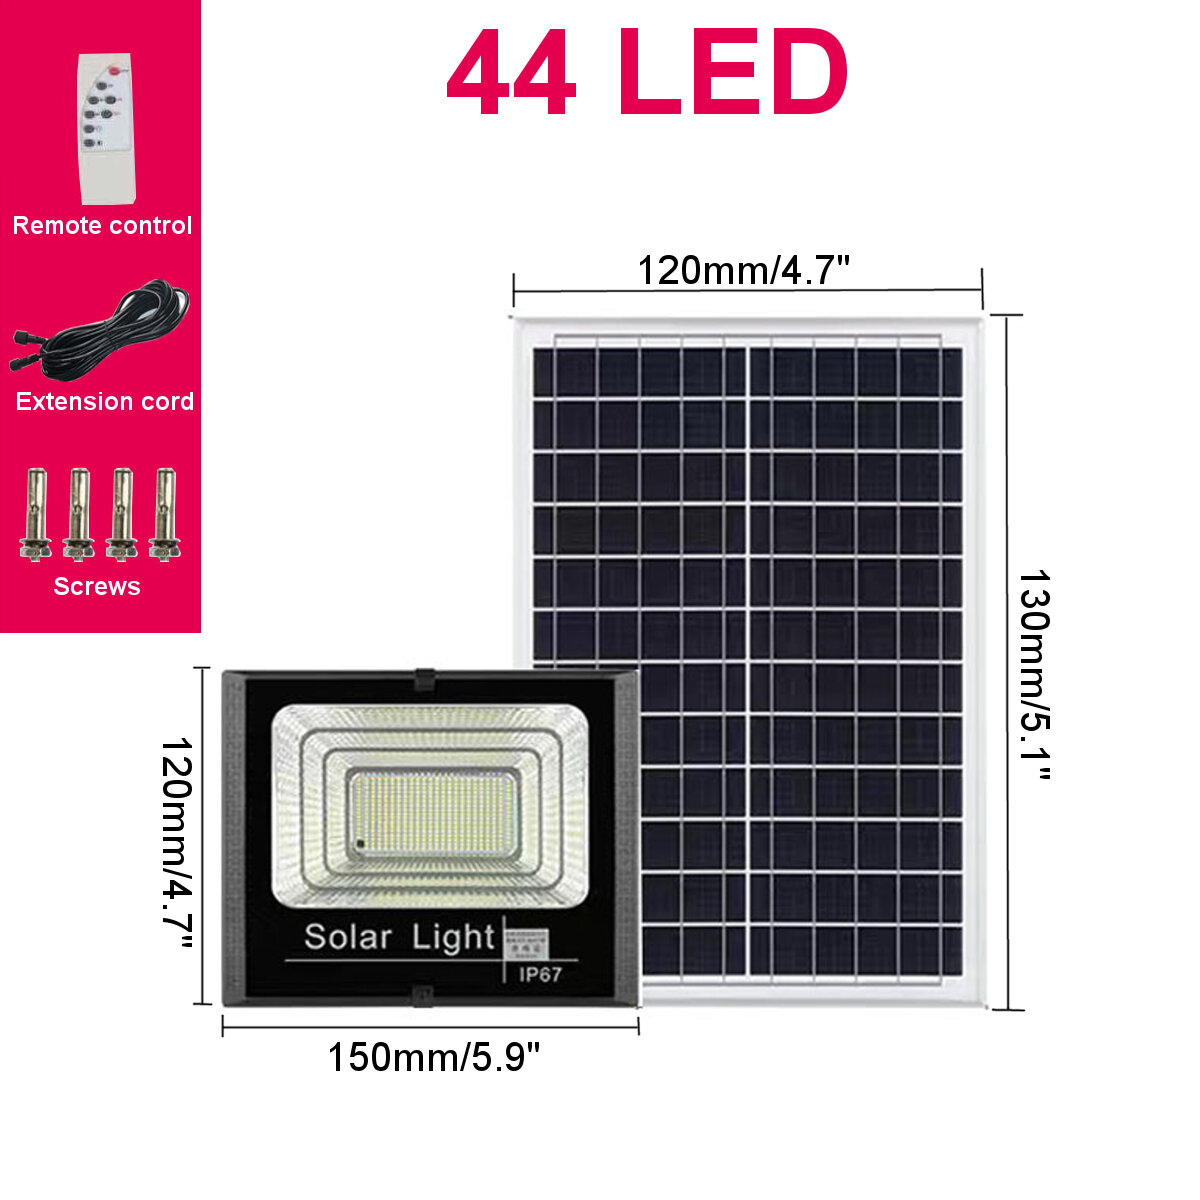 44/170LED Solar Wall Lights Outdoor Waterproof Infrared Garden Lamp Remote control waterproof timing induction light